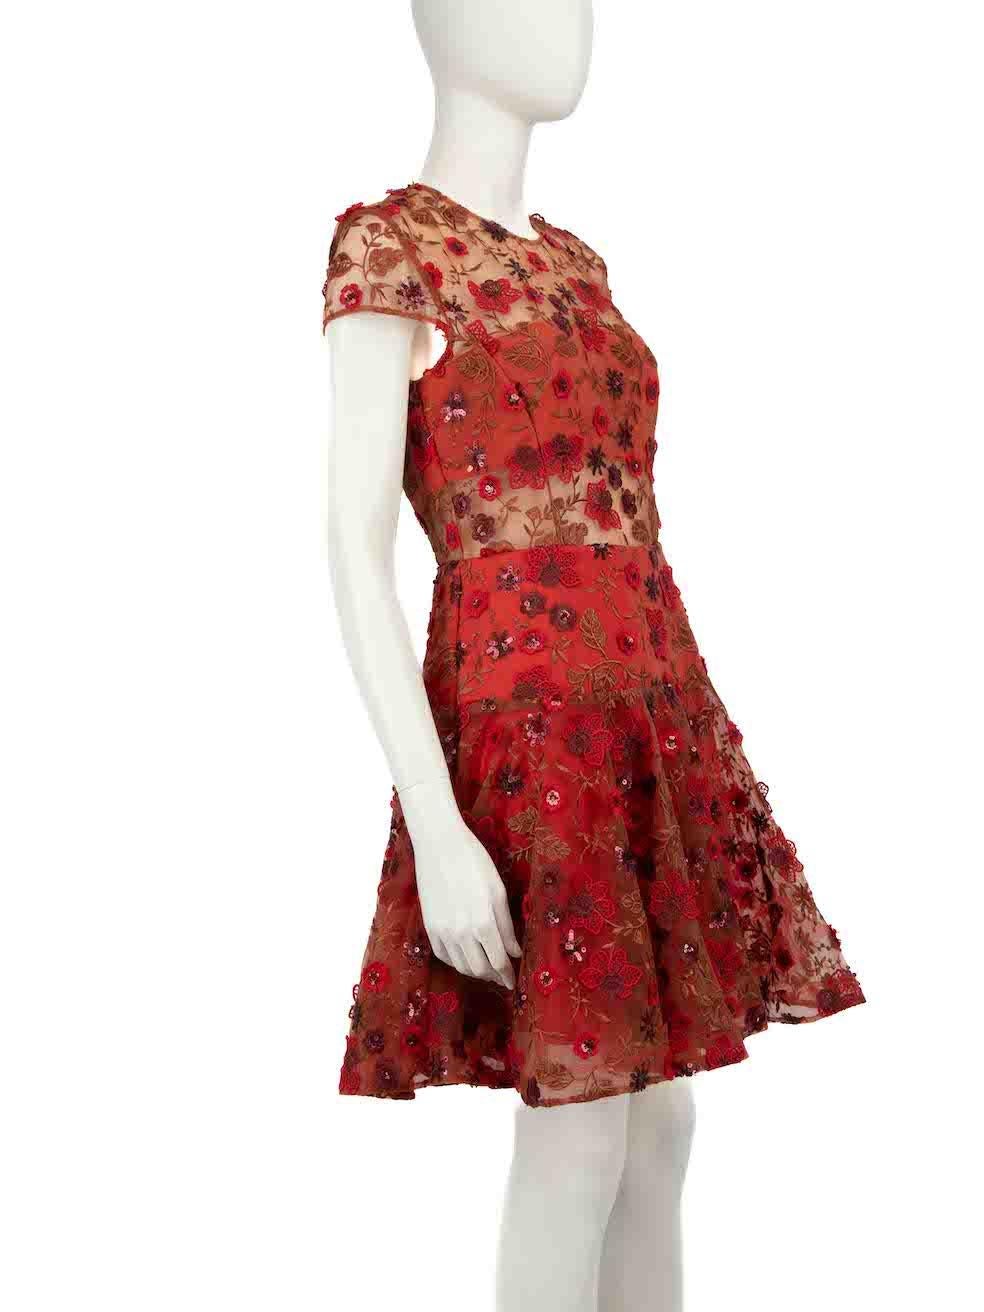 CONDITION is Very good. Minimal wear to dress is evident. Minimal wear to the floral embroidery at the front and back with fraying to the threads on this used Bronx and Banco designer resale item.
 
 
 
 Details
 
 
 Red
 
 Polyester
 
 Dress
 
